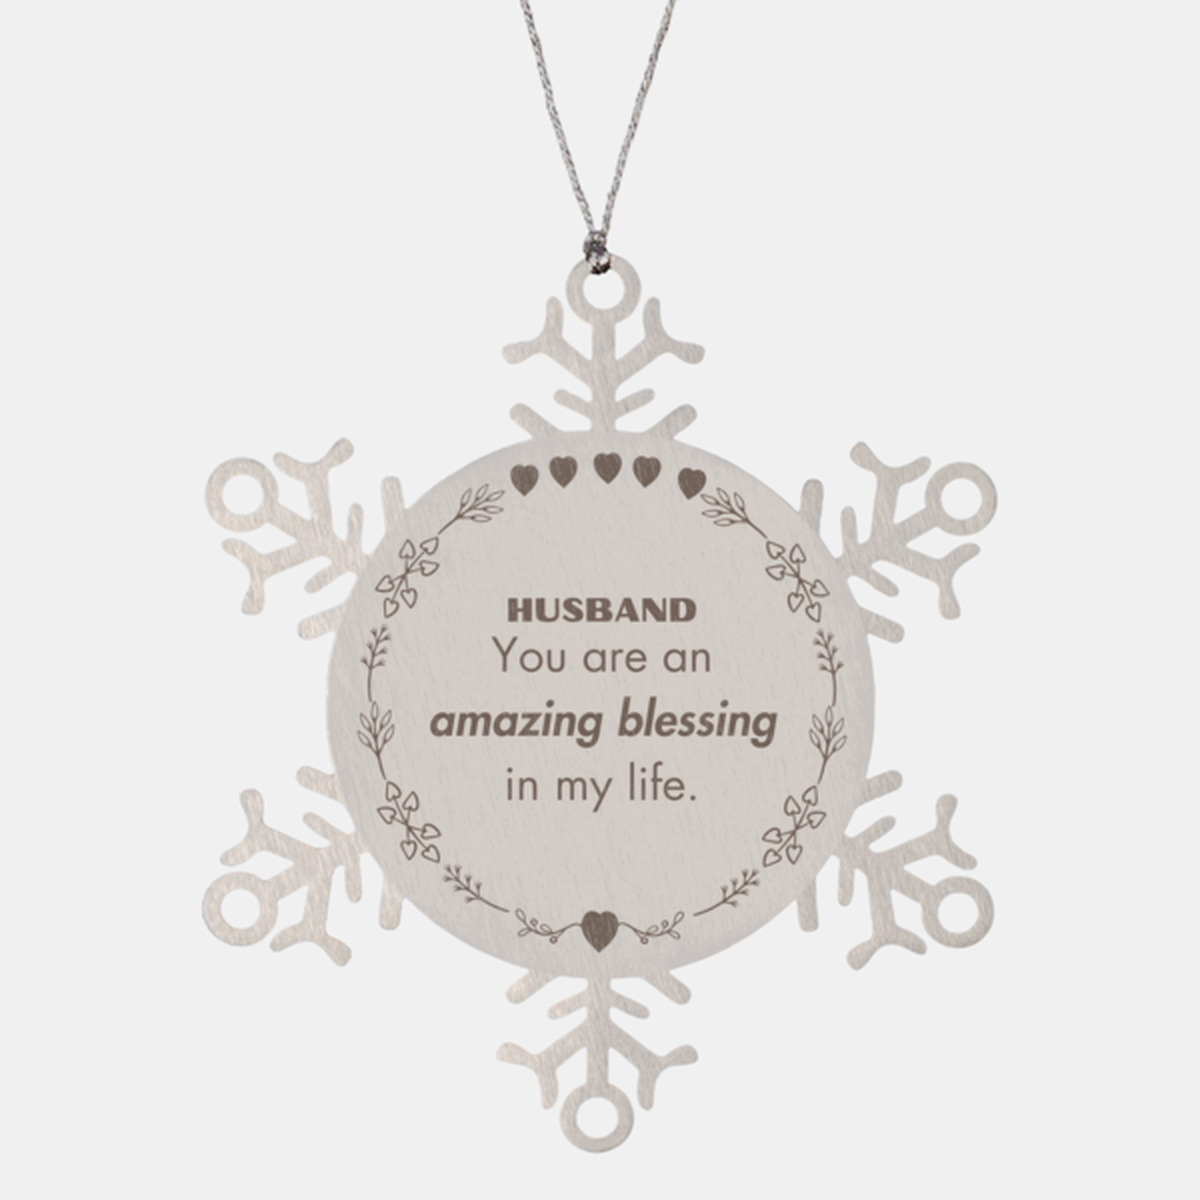 Husband Snowflake Ornament, You are an amazing blessing in my life, Thank You Gifts For Husband, Inspirational Birthday Christmas Unique Gifts For Husband